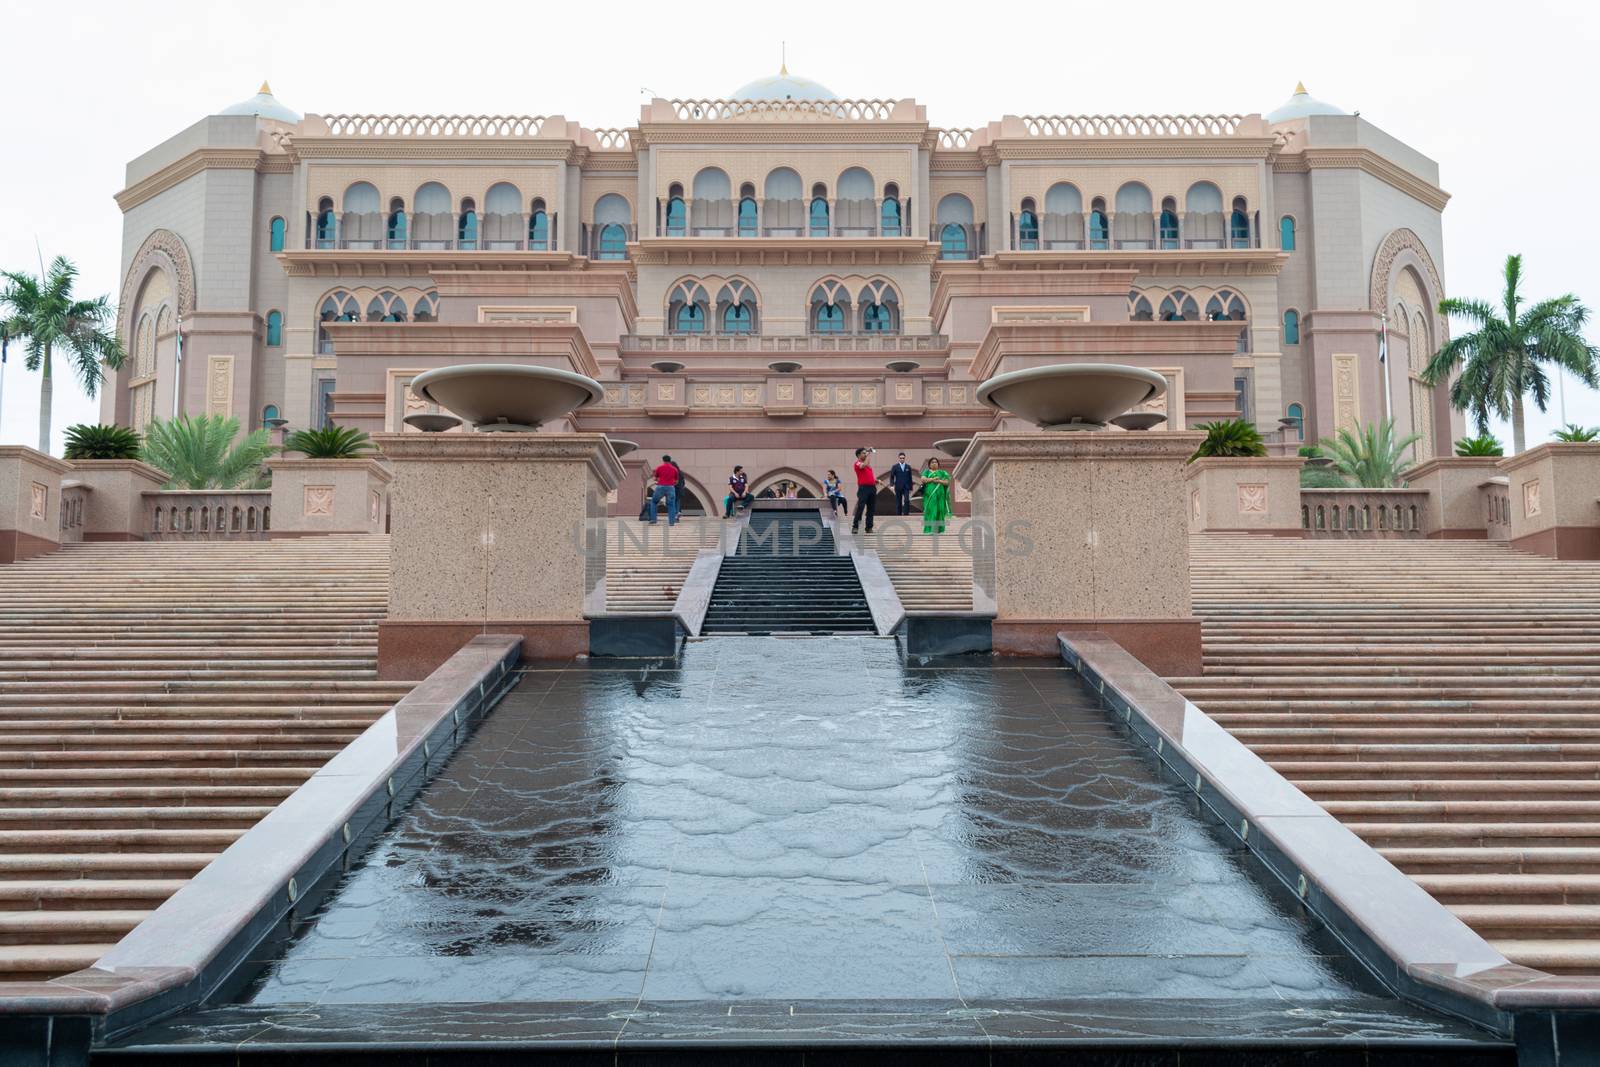 Outdoor front entrance and facade of the Emirates Palace Hotel in Abu Dhabi by kb79